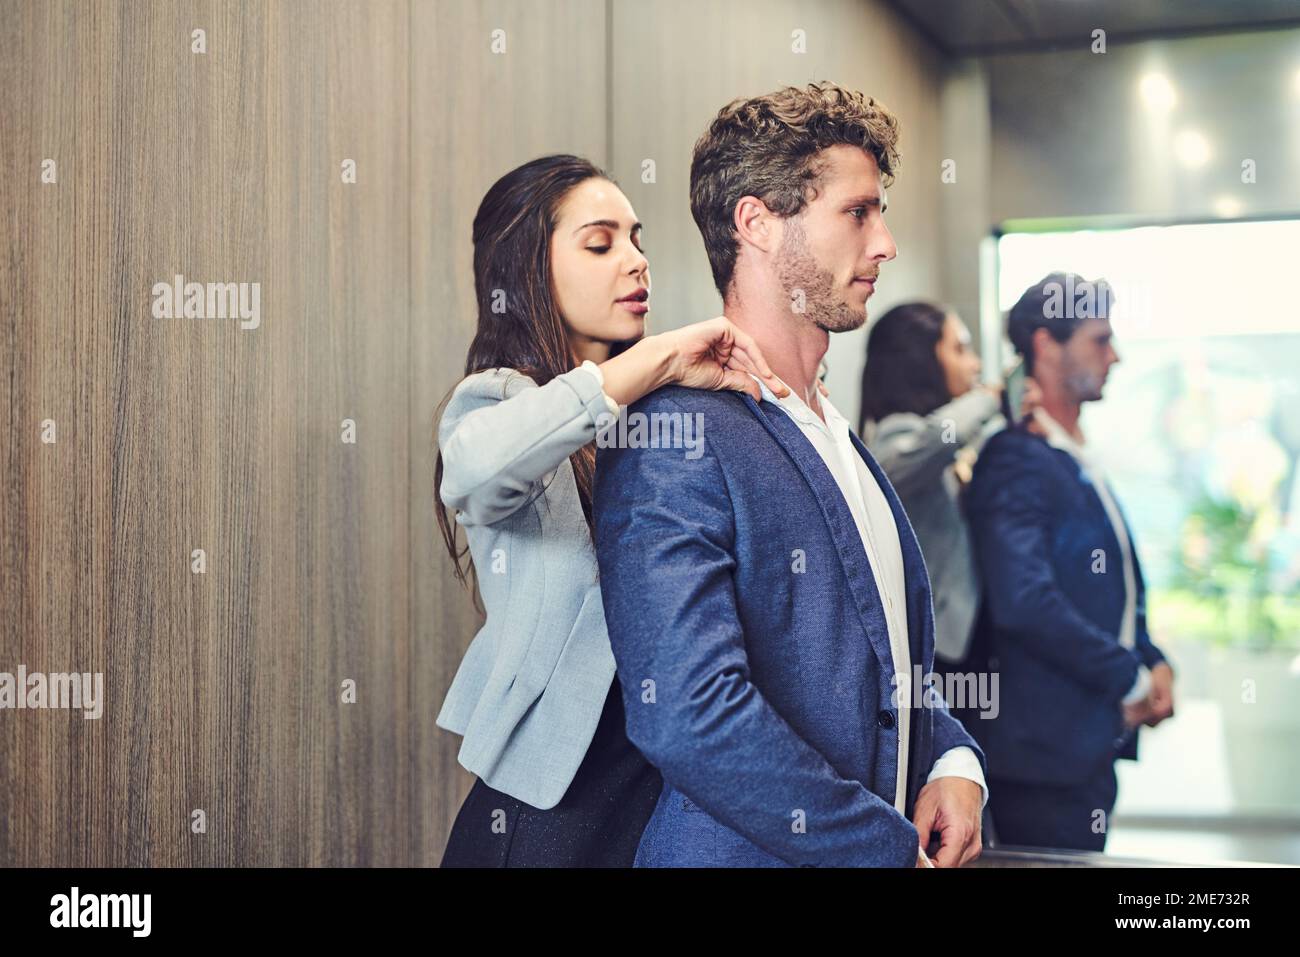 Making sure he looks perfect. a businesswoman adjusting a businessmans collar in an elevator. Stock Photo